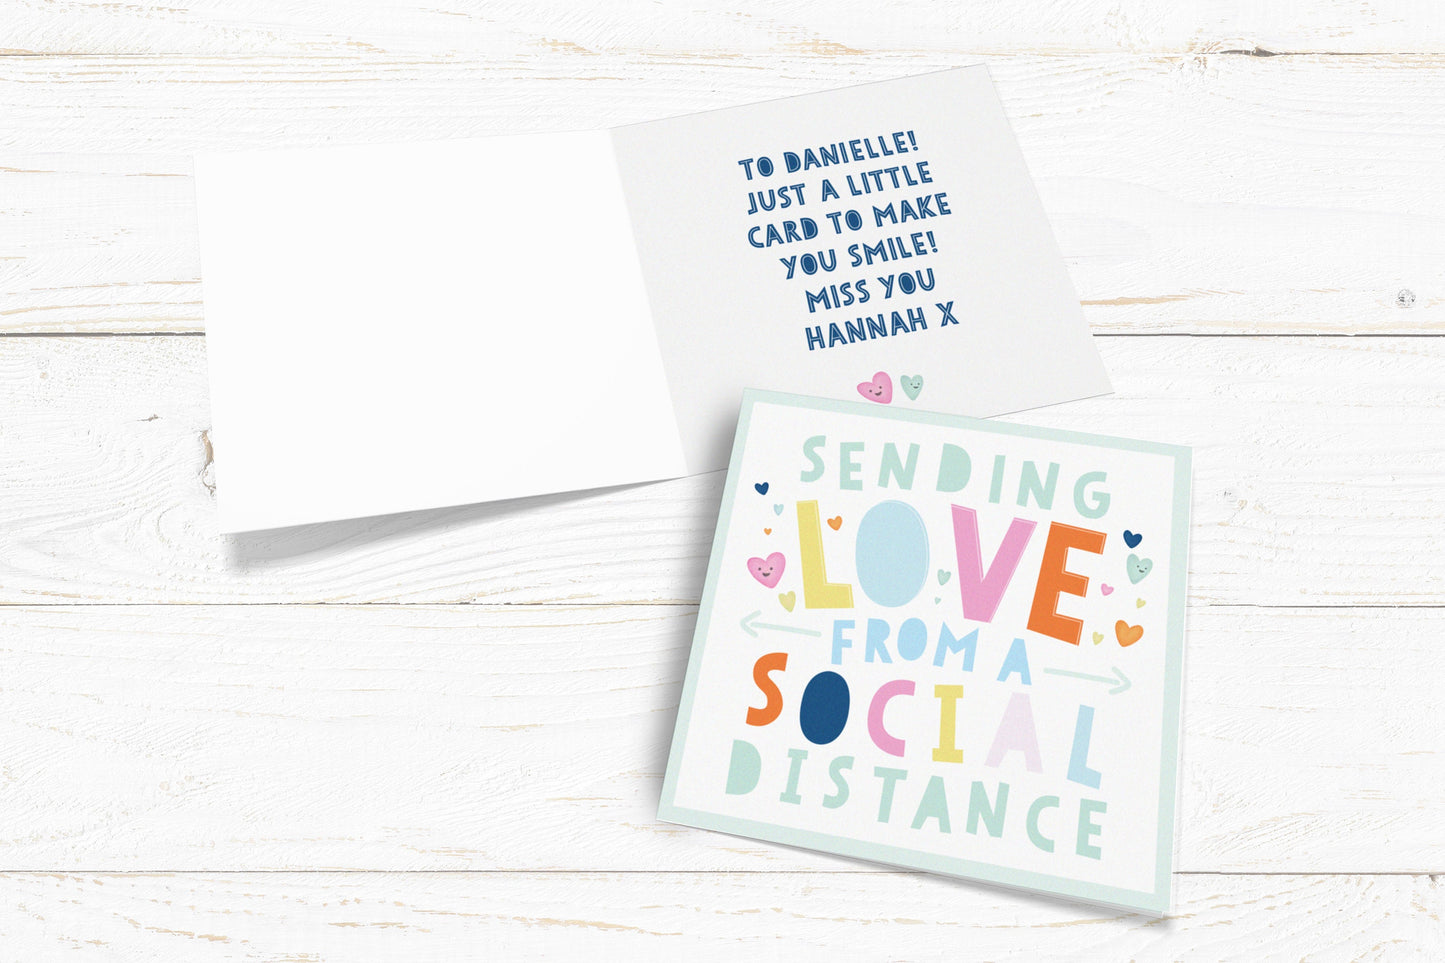 Sending Love From A Social Distance Card. Lockdown Cards. Thank you card. Happy Birthday. Birthday lockdown card. Send Direct.